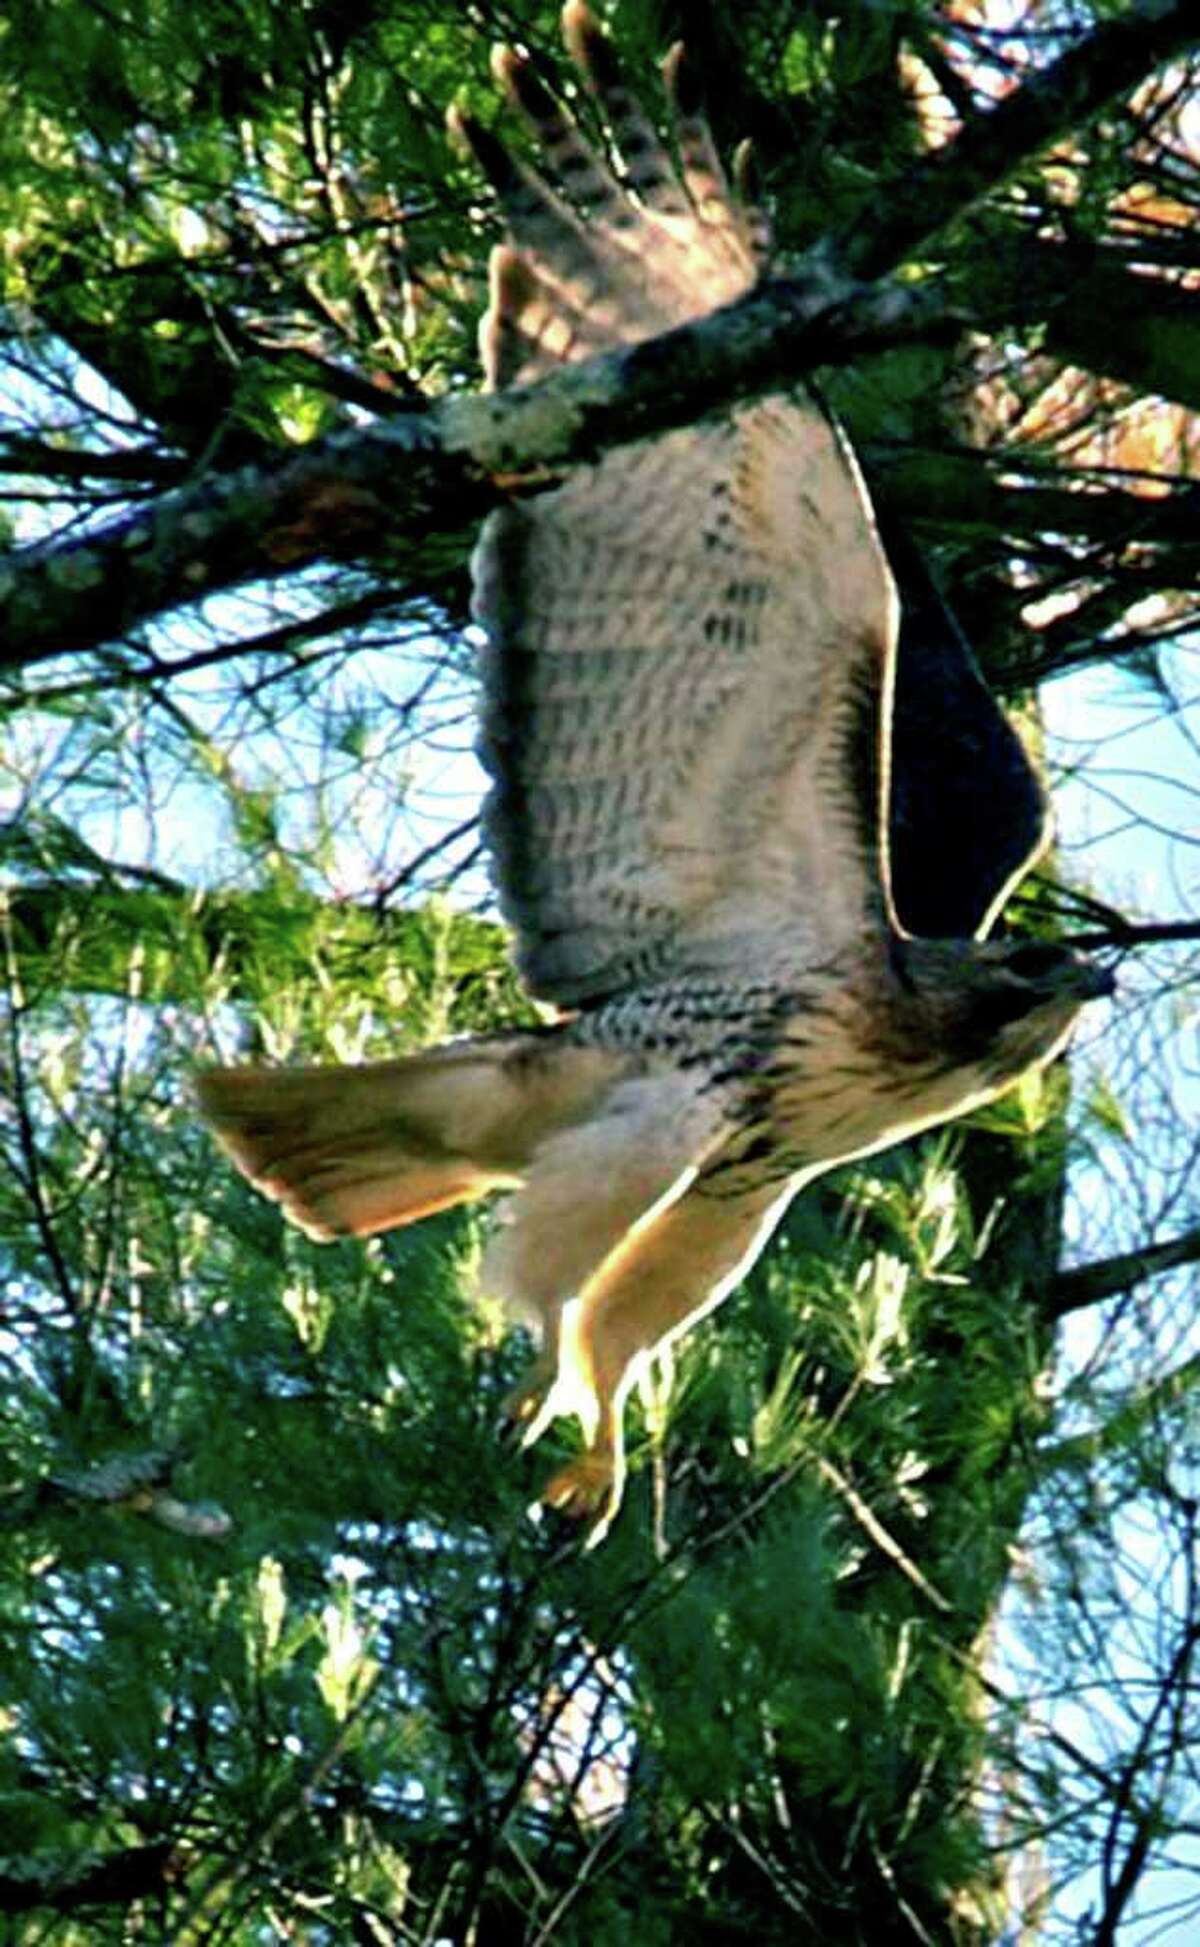 Spring fever SPECTRUM/It was that time of year for creatures big and small to spread their wings and enjoy improved weather. A hawk flies through the branches of a tree in the Candlewood Lake area of New Milford in March.